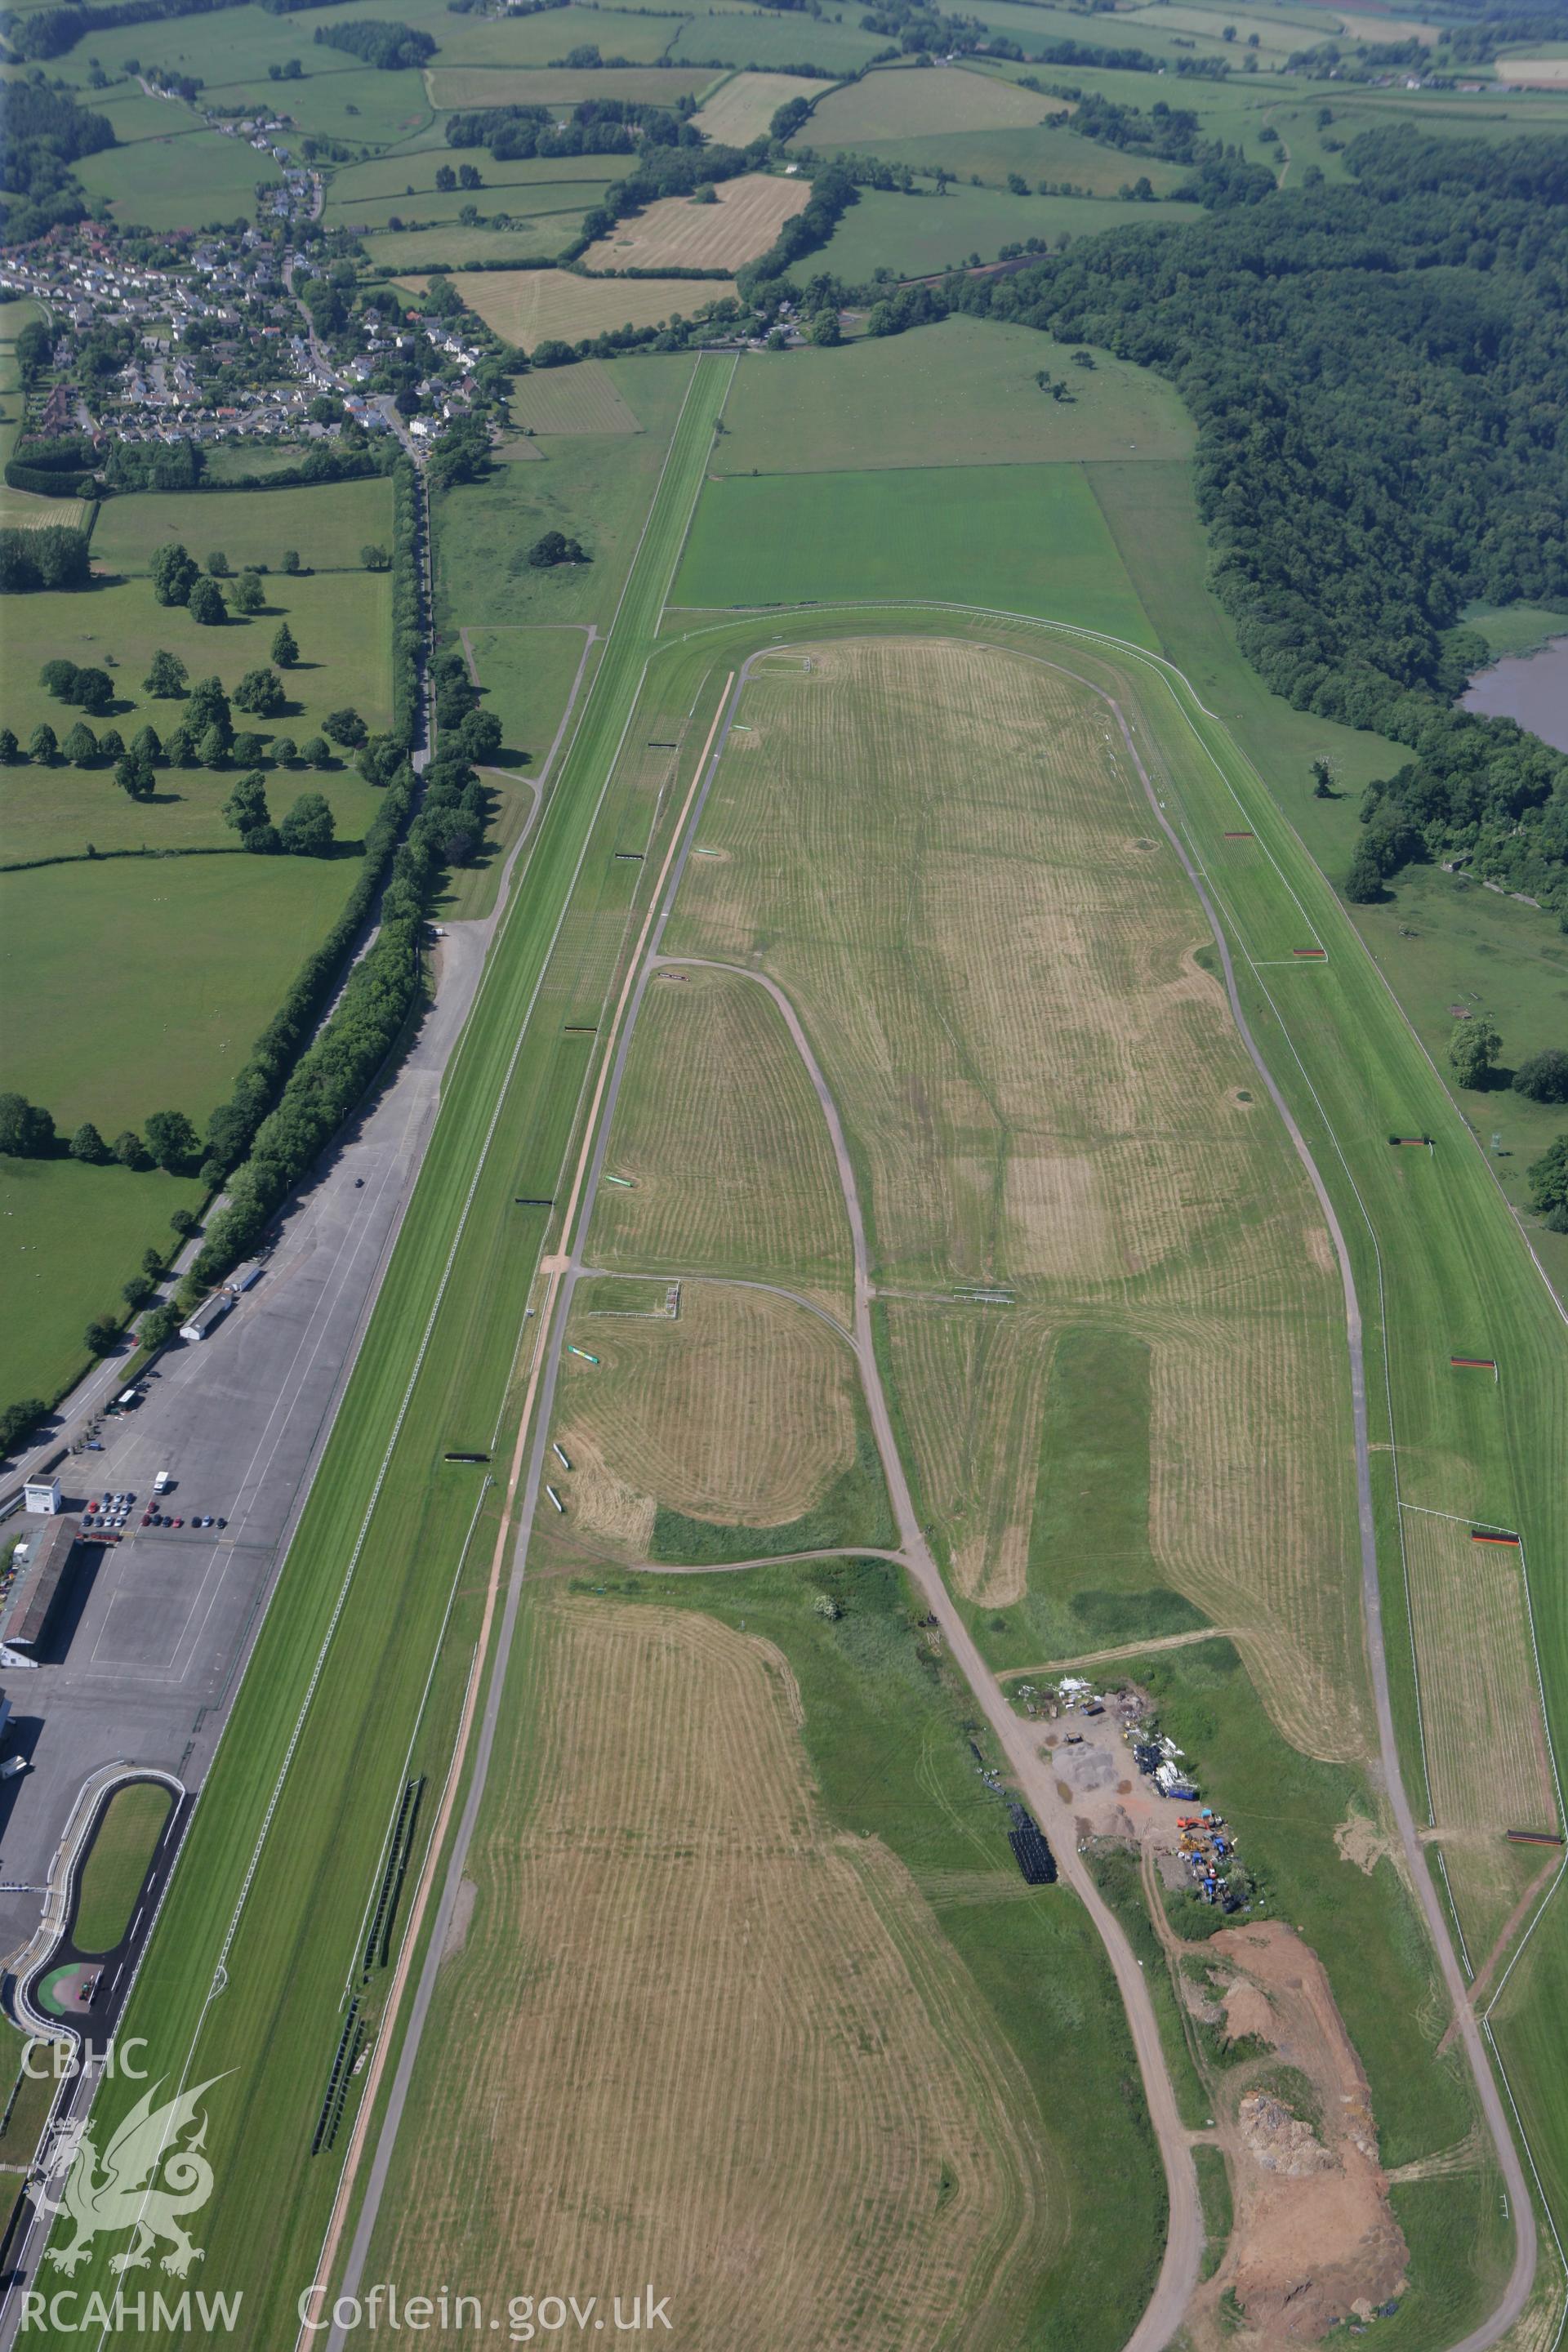 RCAHMW colour oblique photograph of Chepstow Racecourse. Taken by Toby Driver on 21/06/2010.